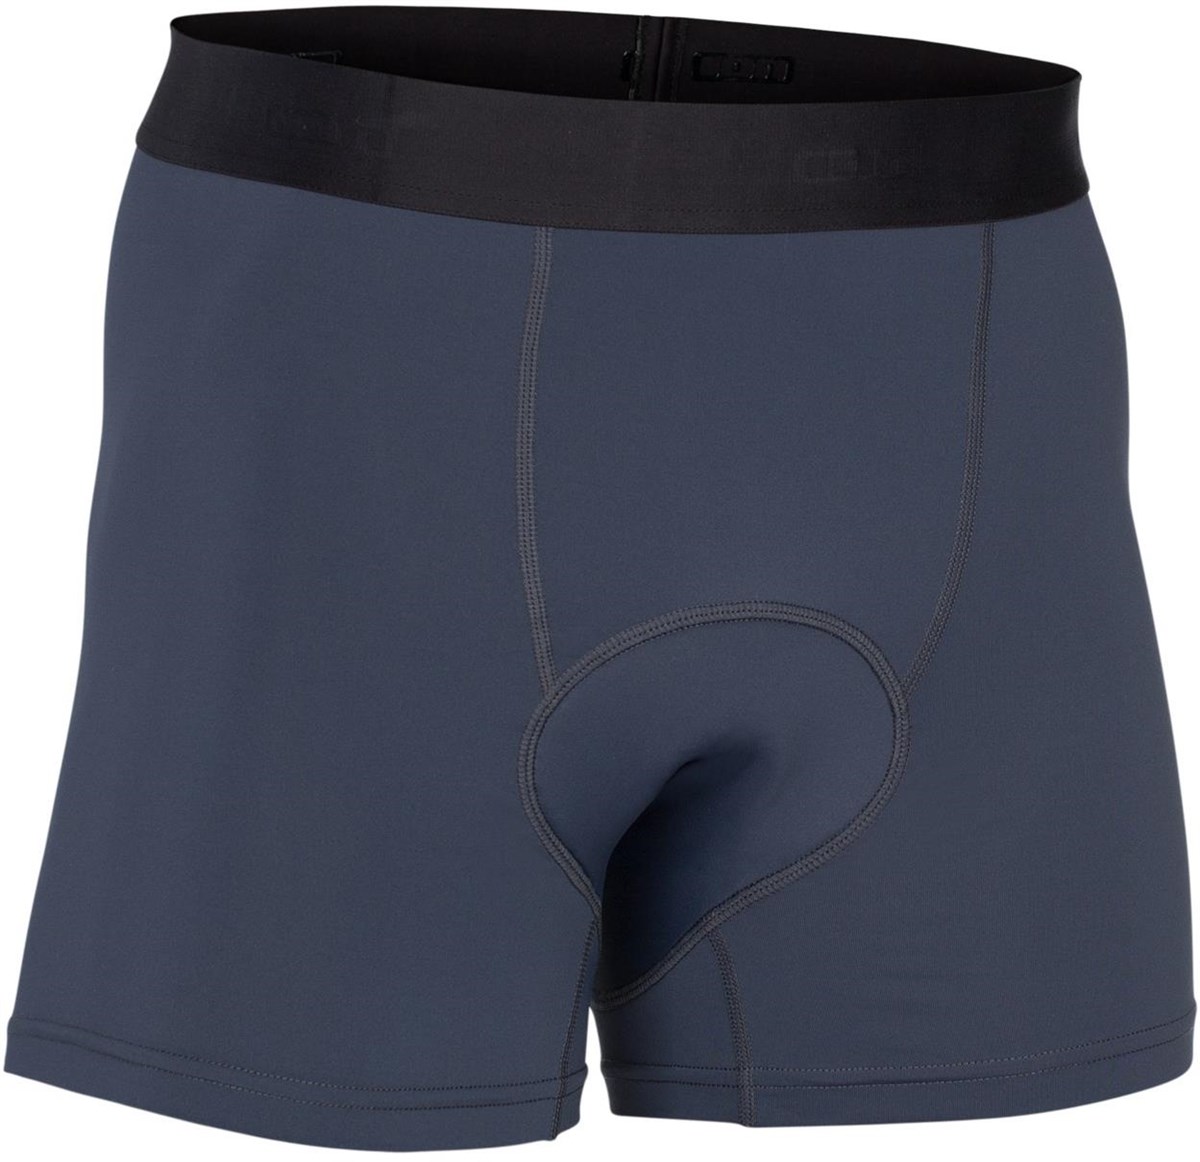 Ion In-Shorts Short Liner product image